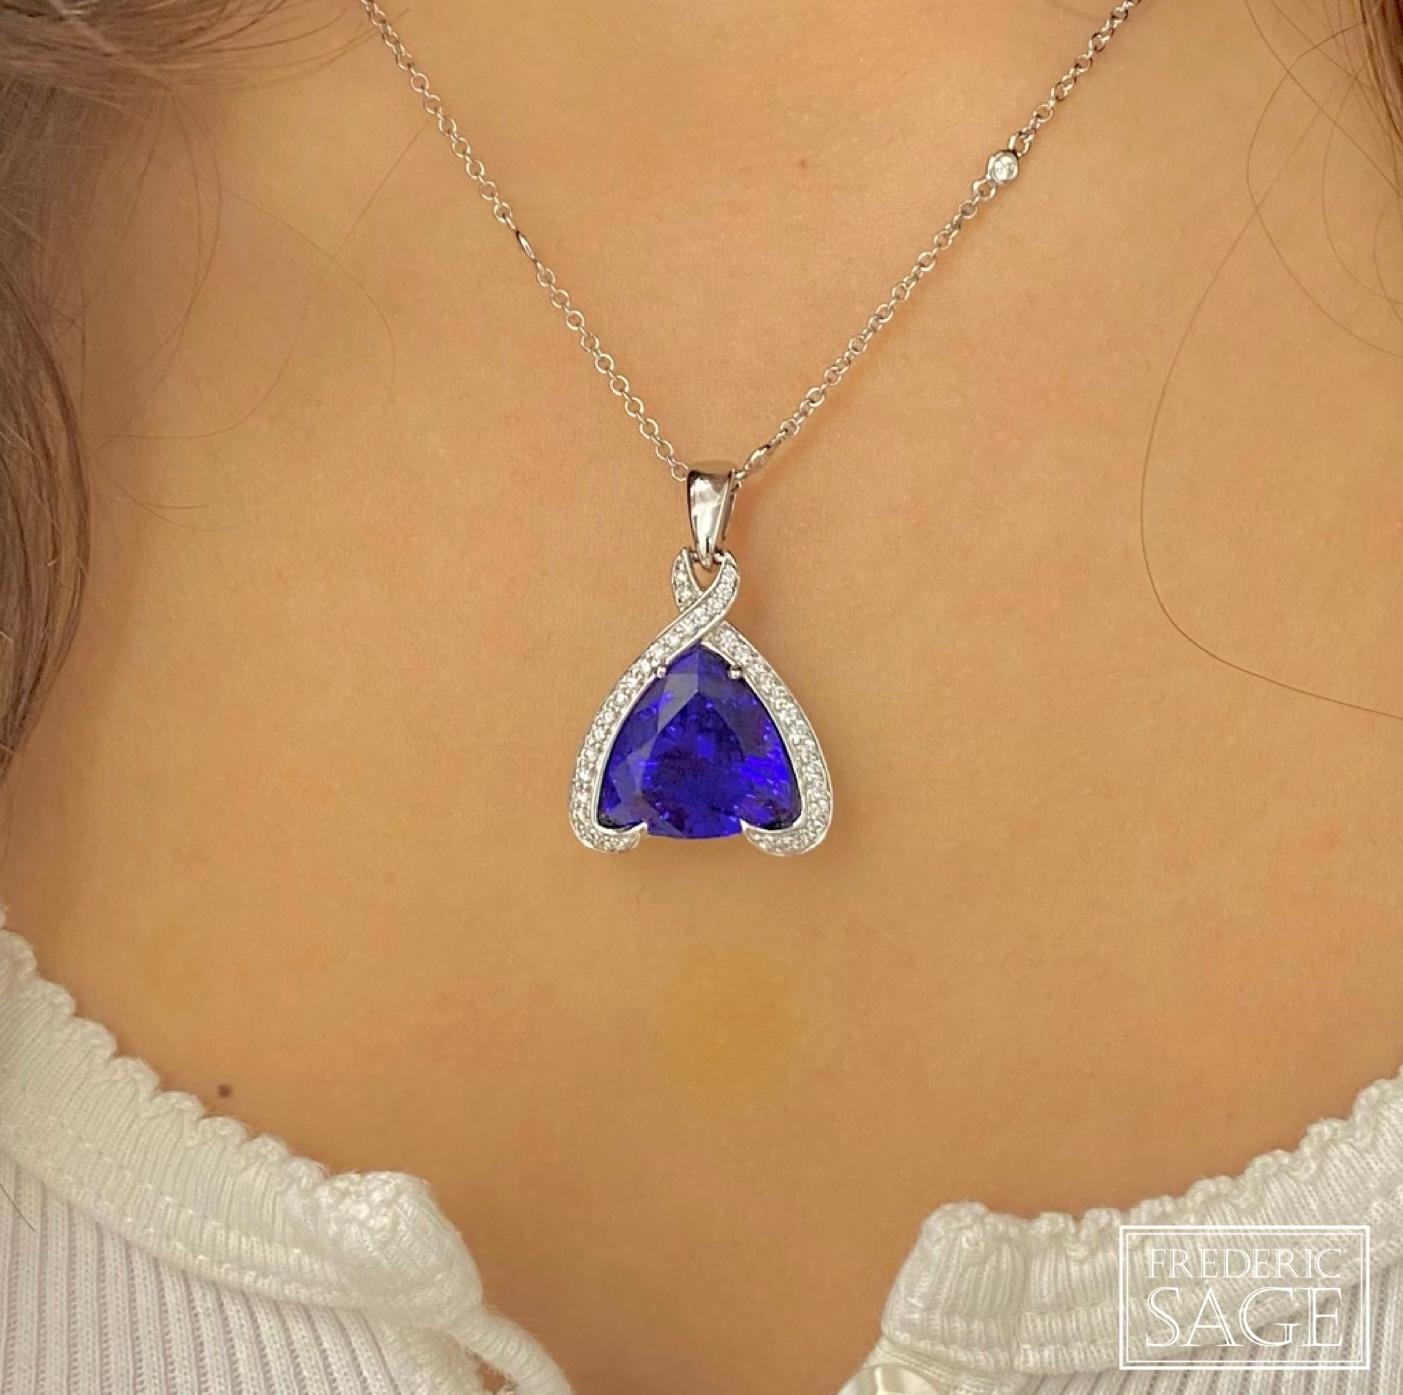 One of a Kind Trillion Gem Tanzanite on White Gold Pave Diamond Pendant With Chain, Tanzanite 11.05 Ct, Diamond 0.51 Ct. Approximately 21 mm x 25 mm

Available in other metal/ gemstone options: These Gemstone pieces can be made in white, pink,